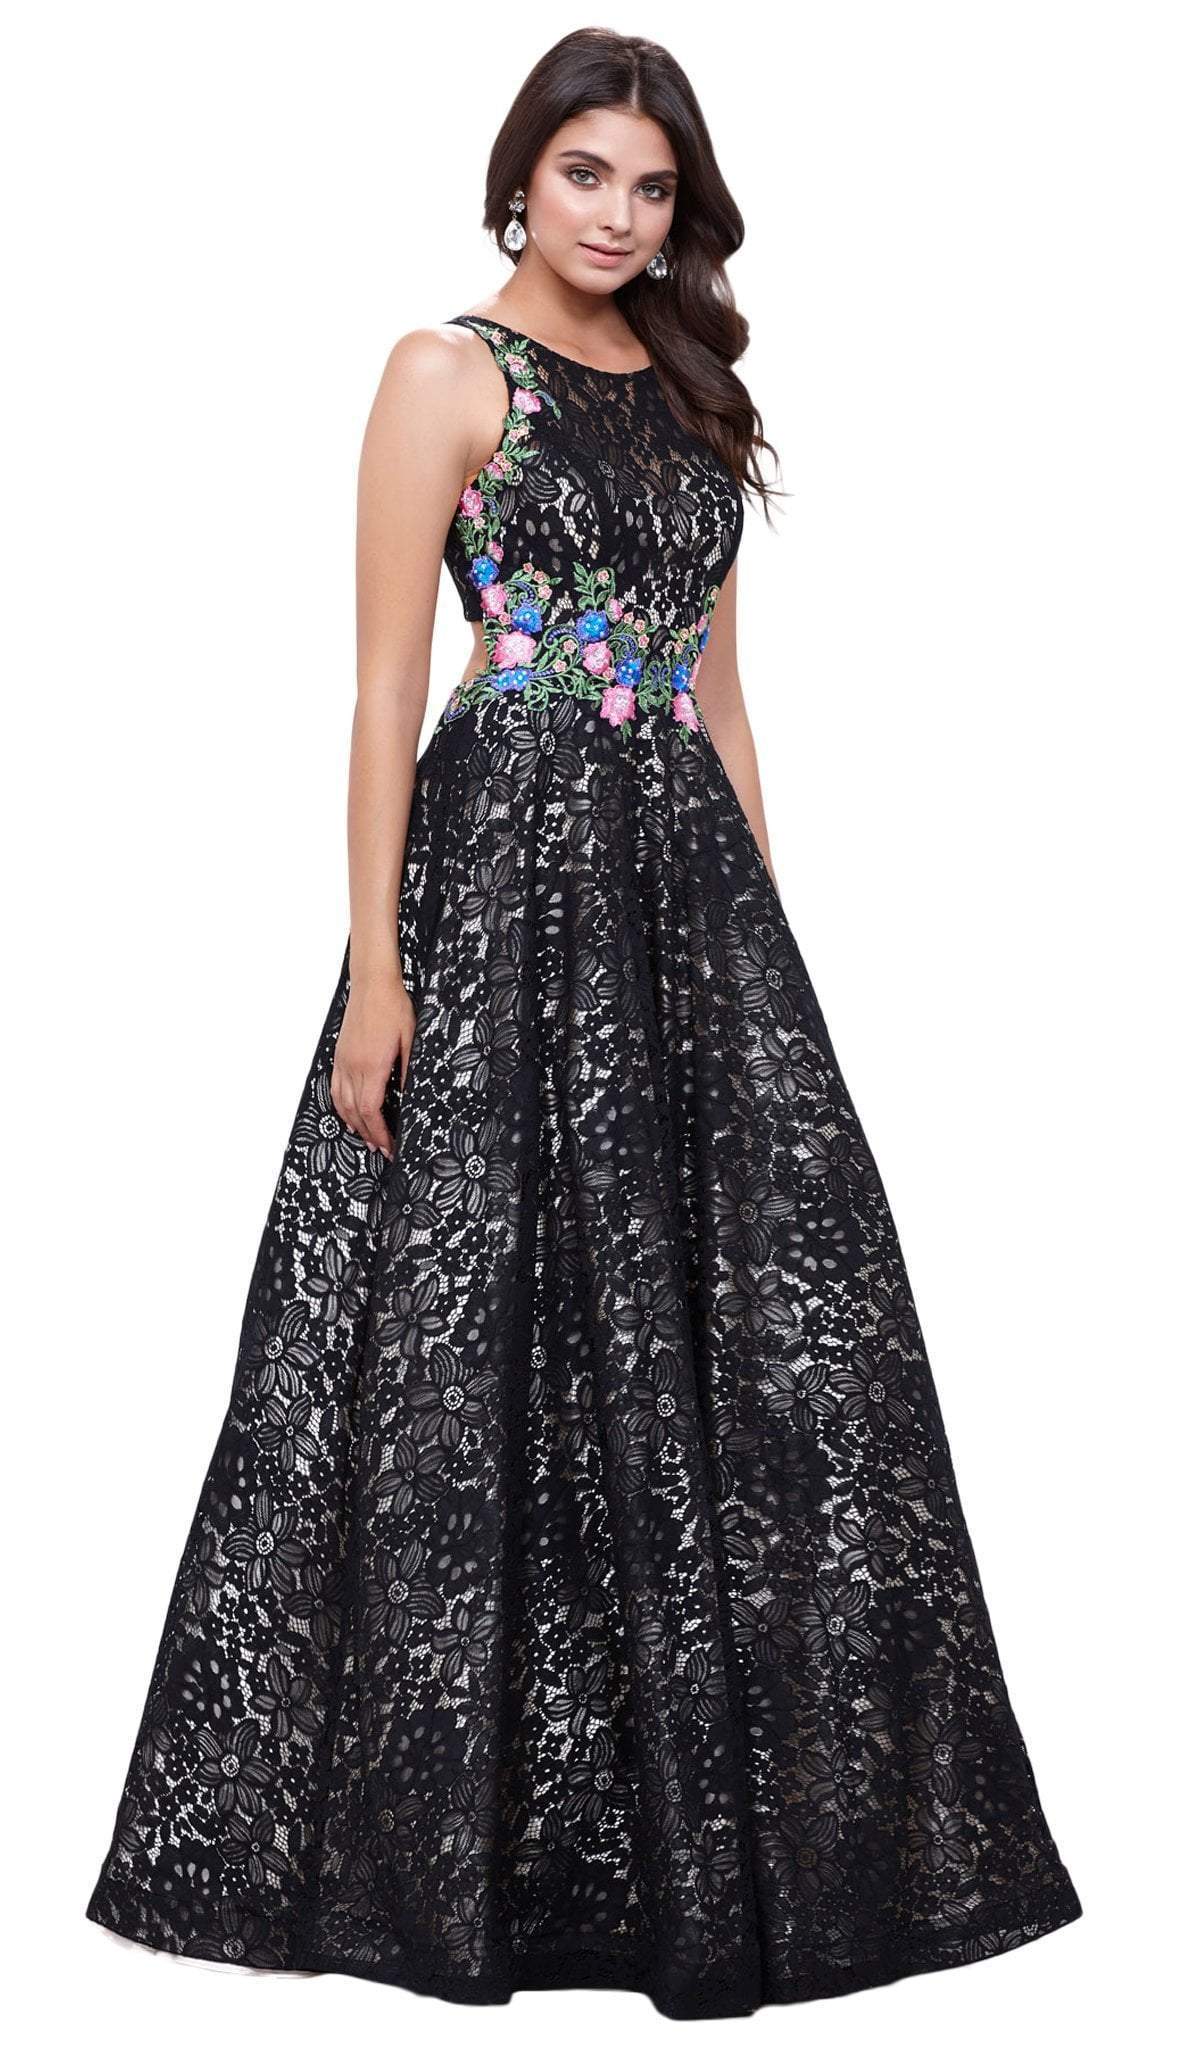 Nox Anabel - Embroidered Cut-Out Back A-Line Dress 8281SC In Black